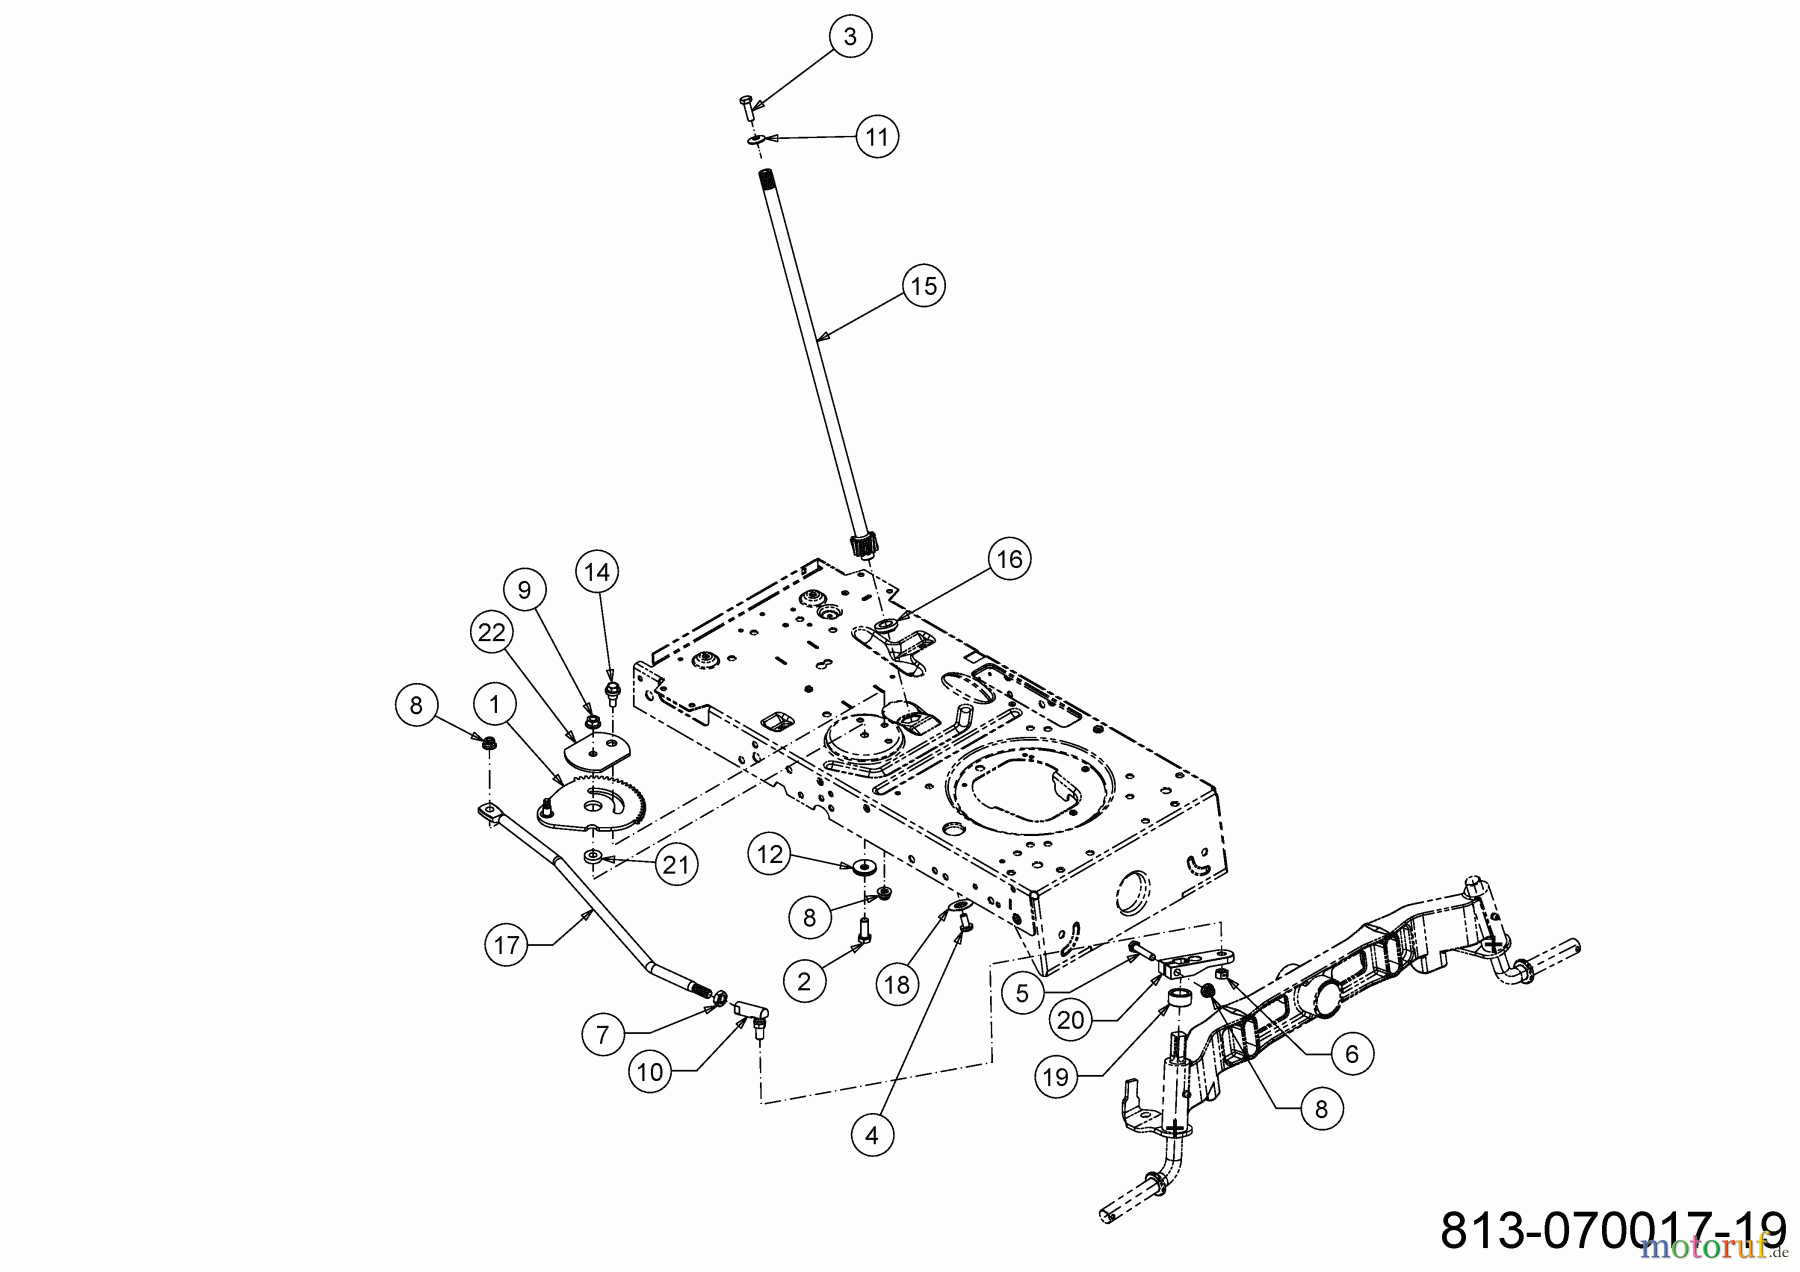  MTD Lawn tractors POWER EDITION 1750 13A8715N683 (2021) Steering